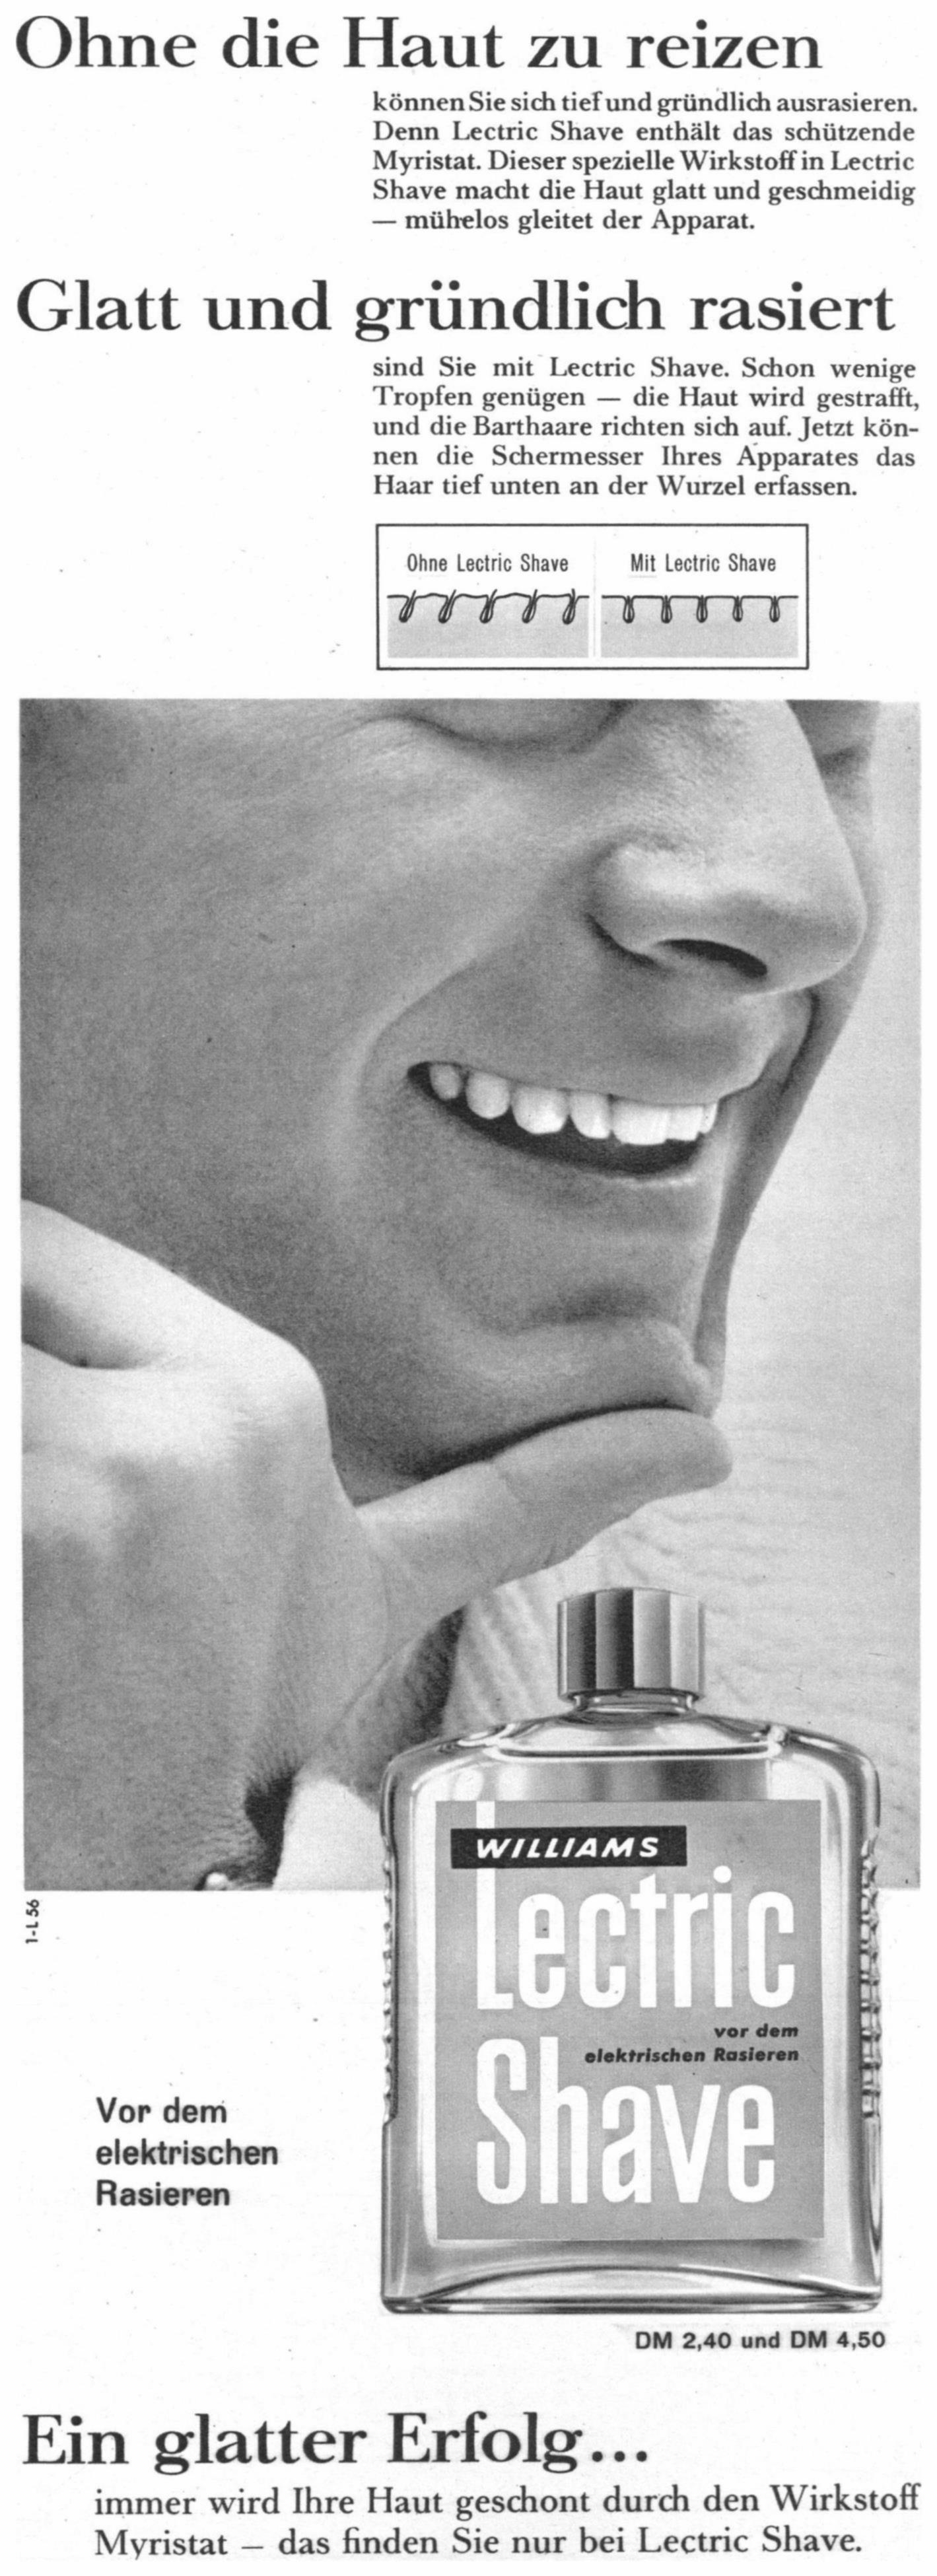 Lectric Shave 1961 0.jpg